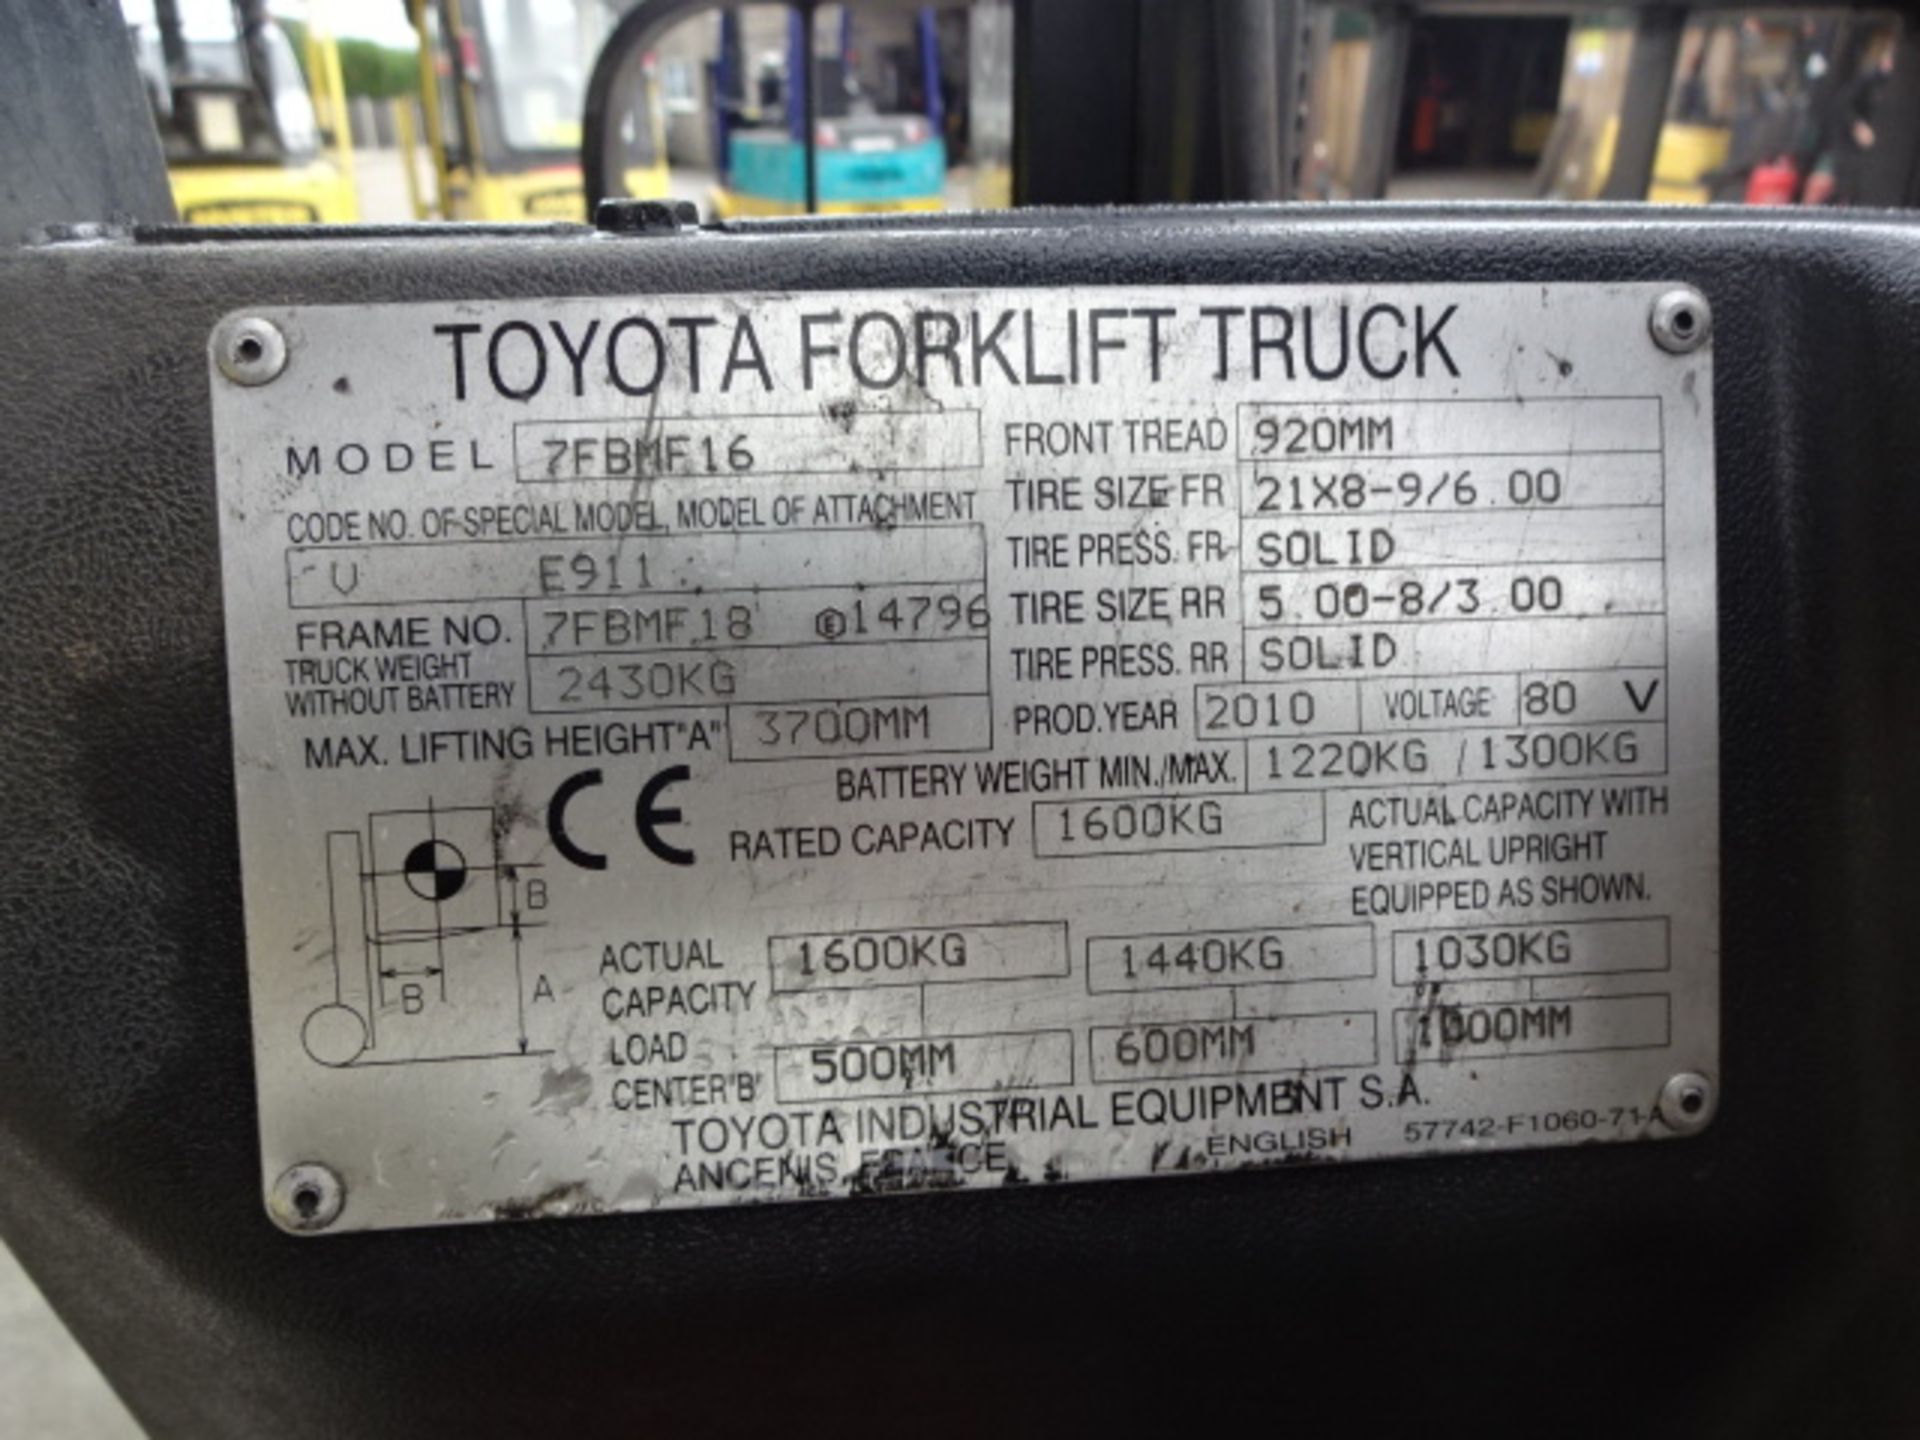 2010 TOYOTA 7FBMF16 1.6t battery driven forklift truck S/n: E14796 with duplex mast & side-shift ( - Image 4 of 7